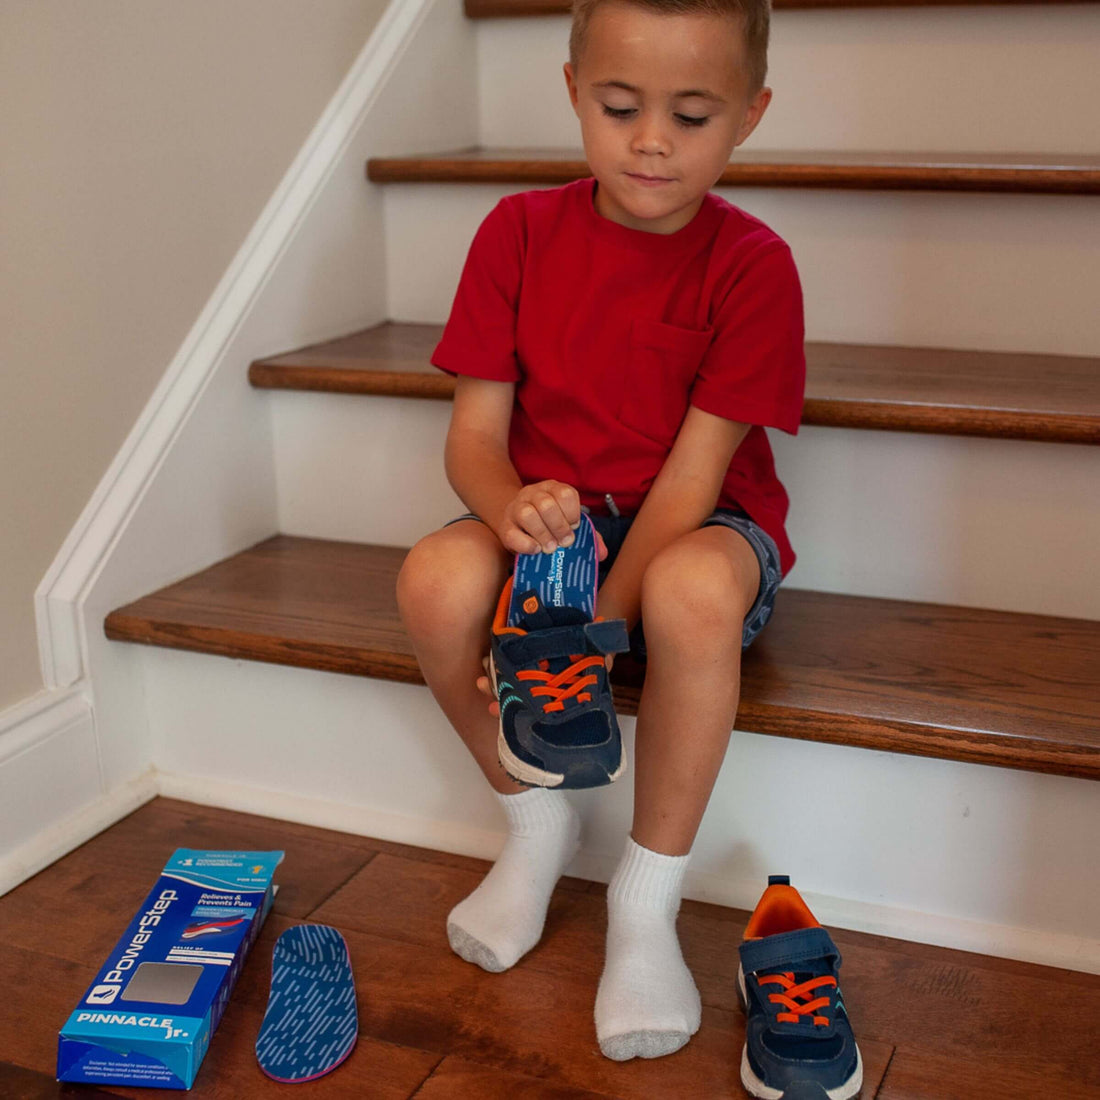 Powerstep Pinnacle Jr. Insoles For Pain Relief